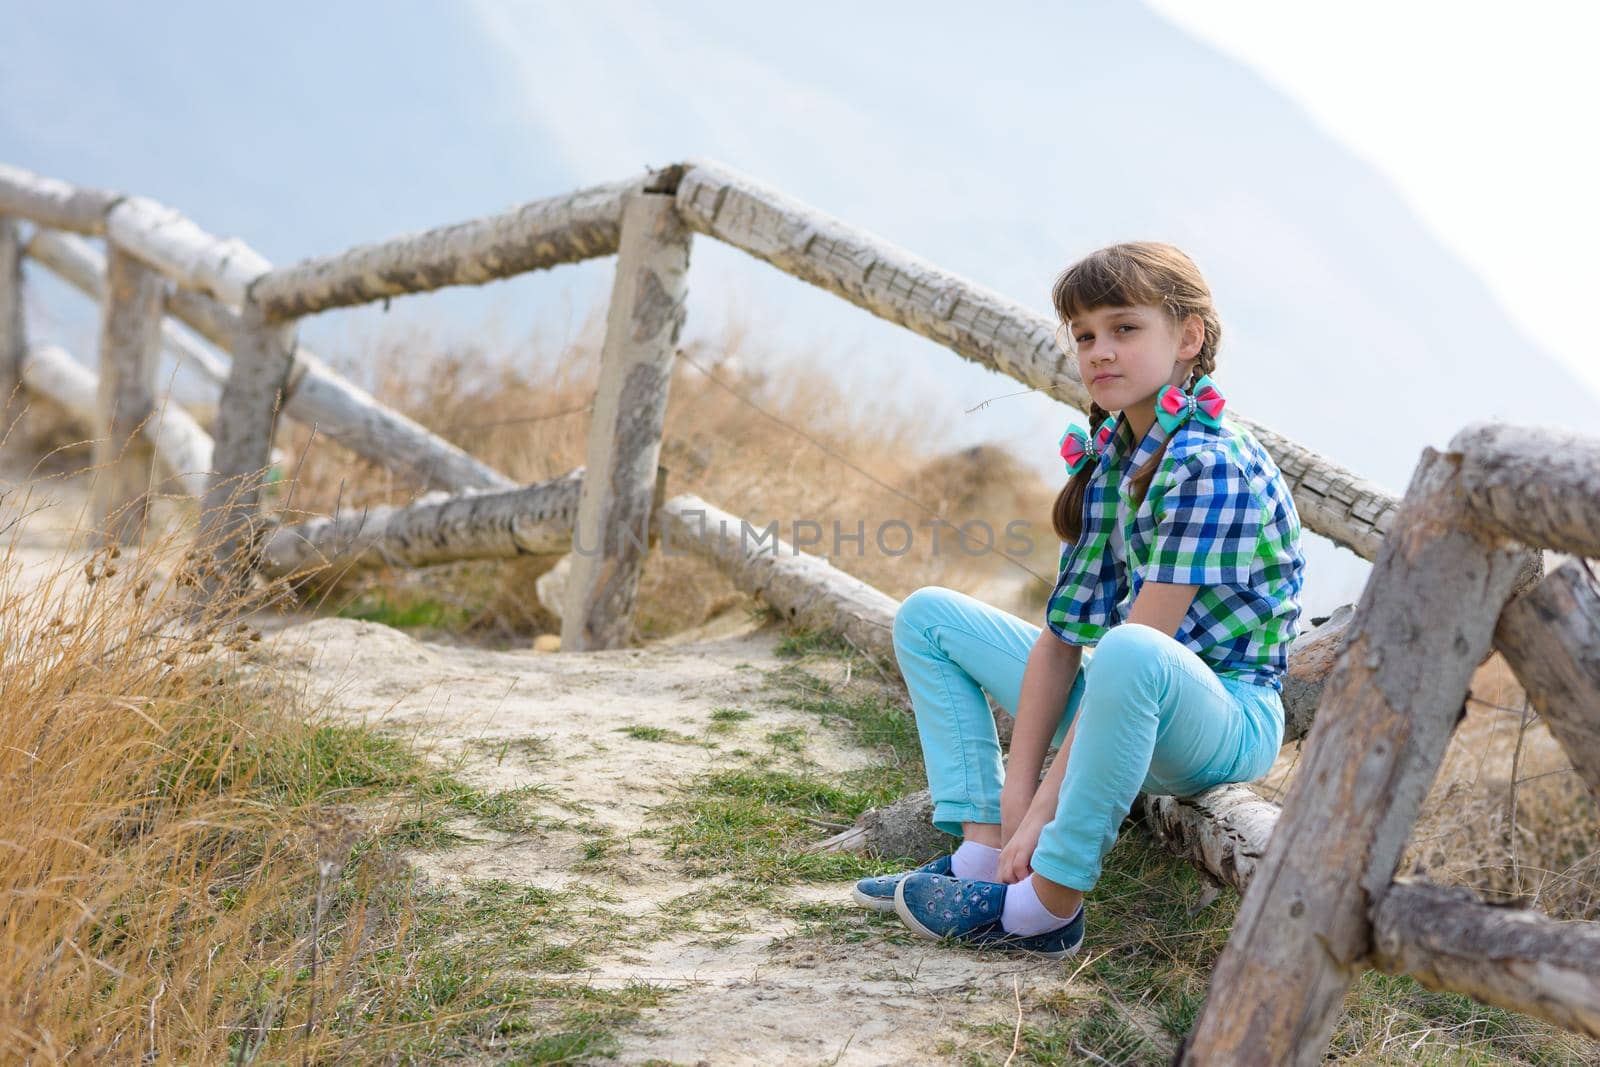 A girl sits on a fence made of a wooden blockhouse against the background of a landscape